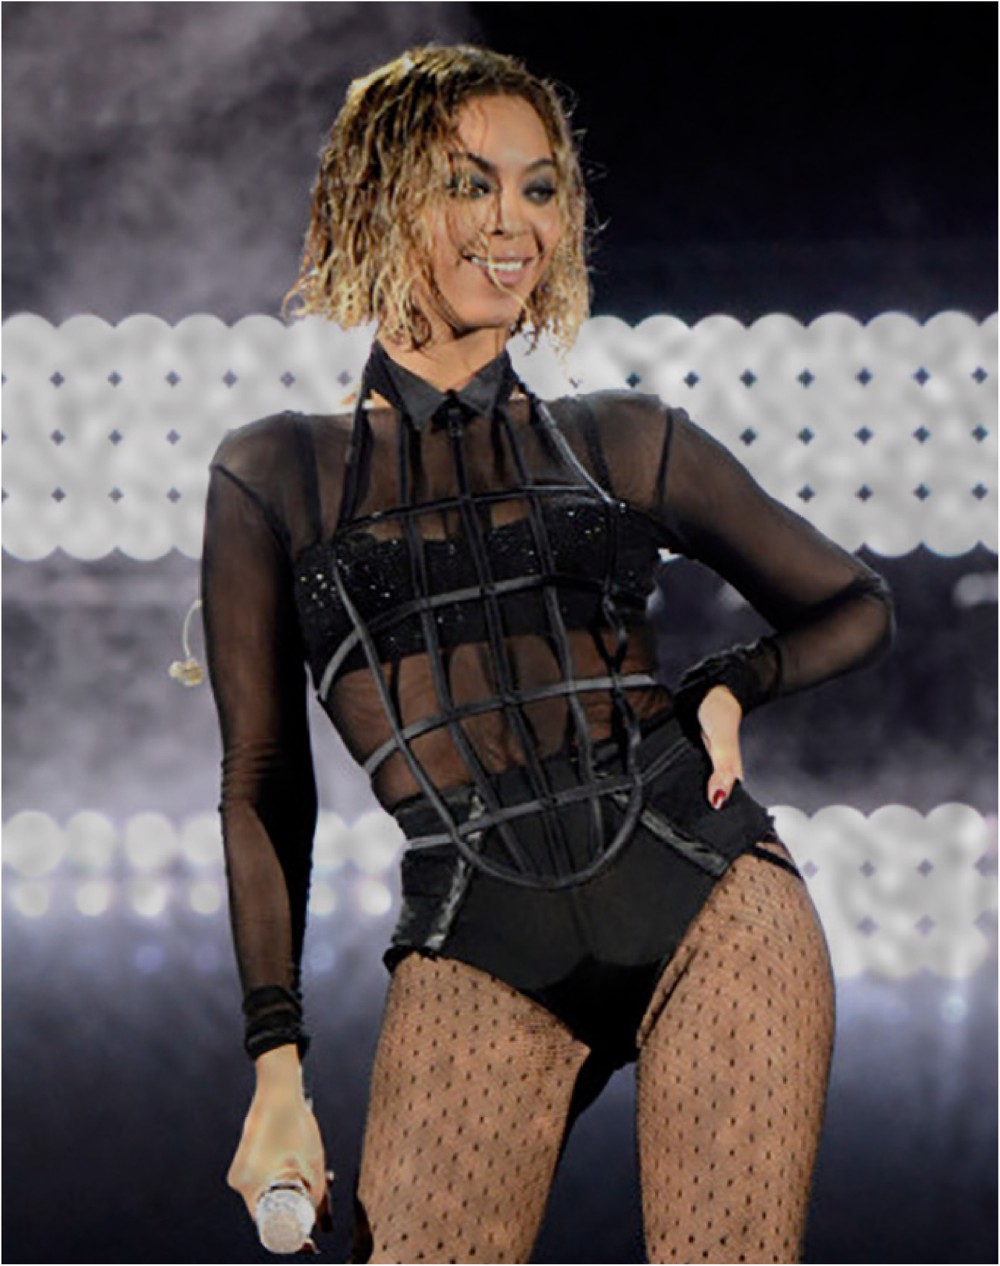 Beyonce wearing Nichole de Carle's bodysuit at the Grammy Awards in 2012. ©Getty images.